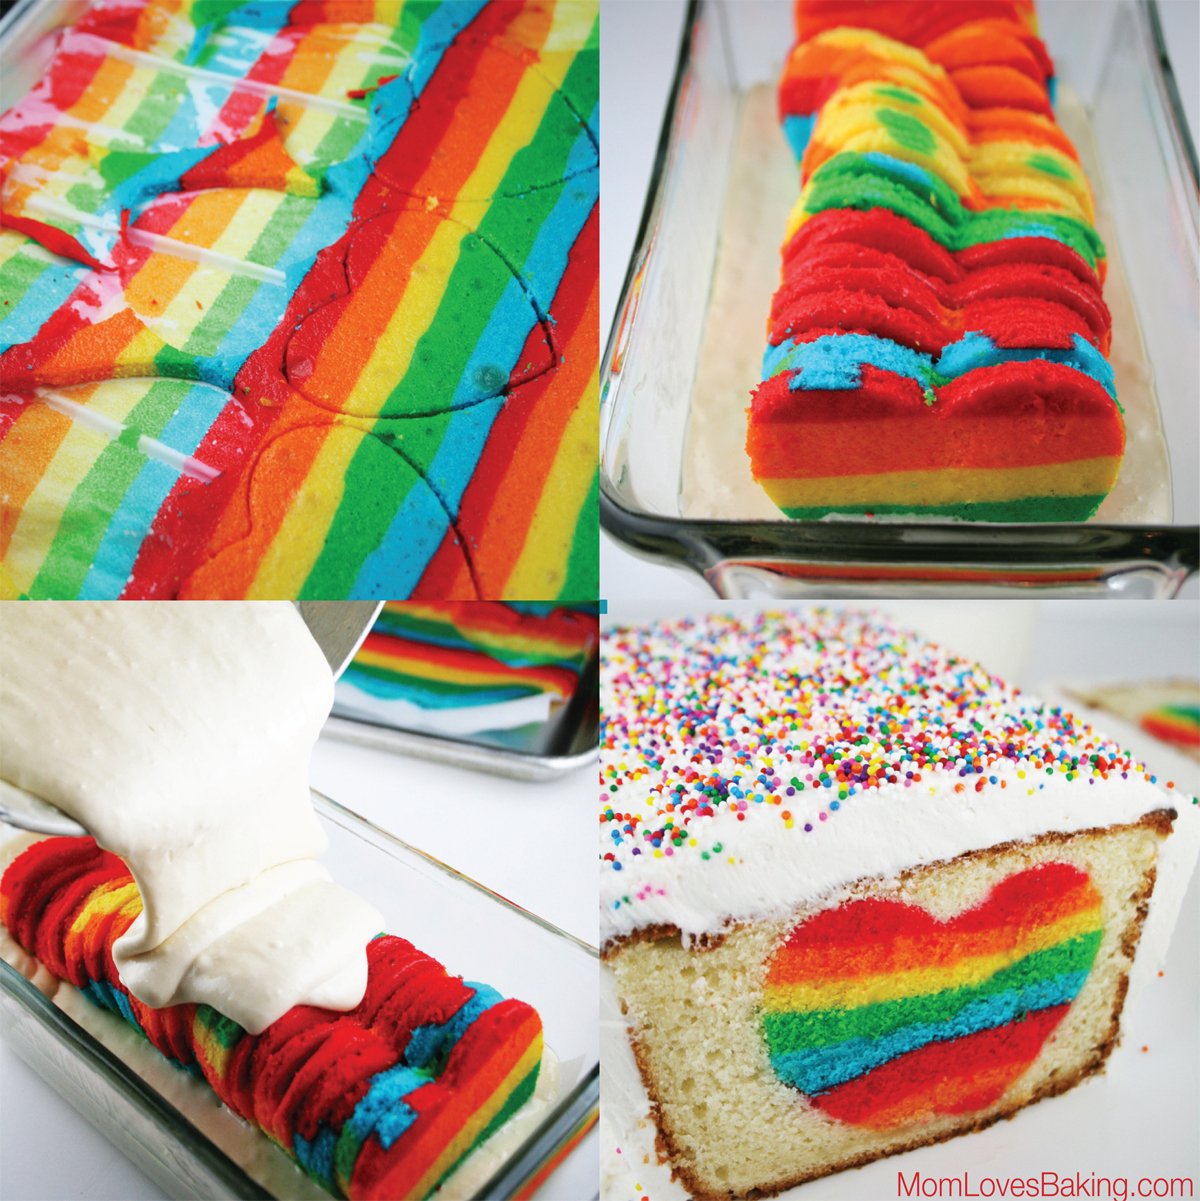 Steps showing how to make a rainbow heart surprise inside cake.